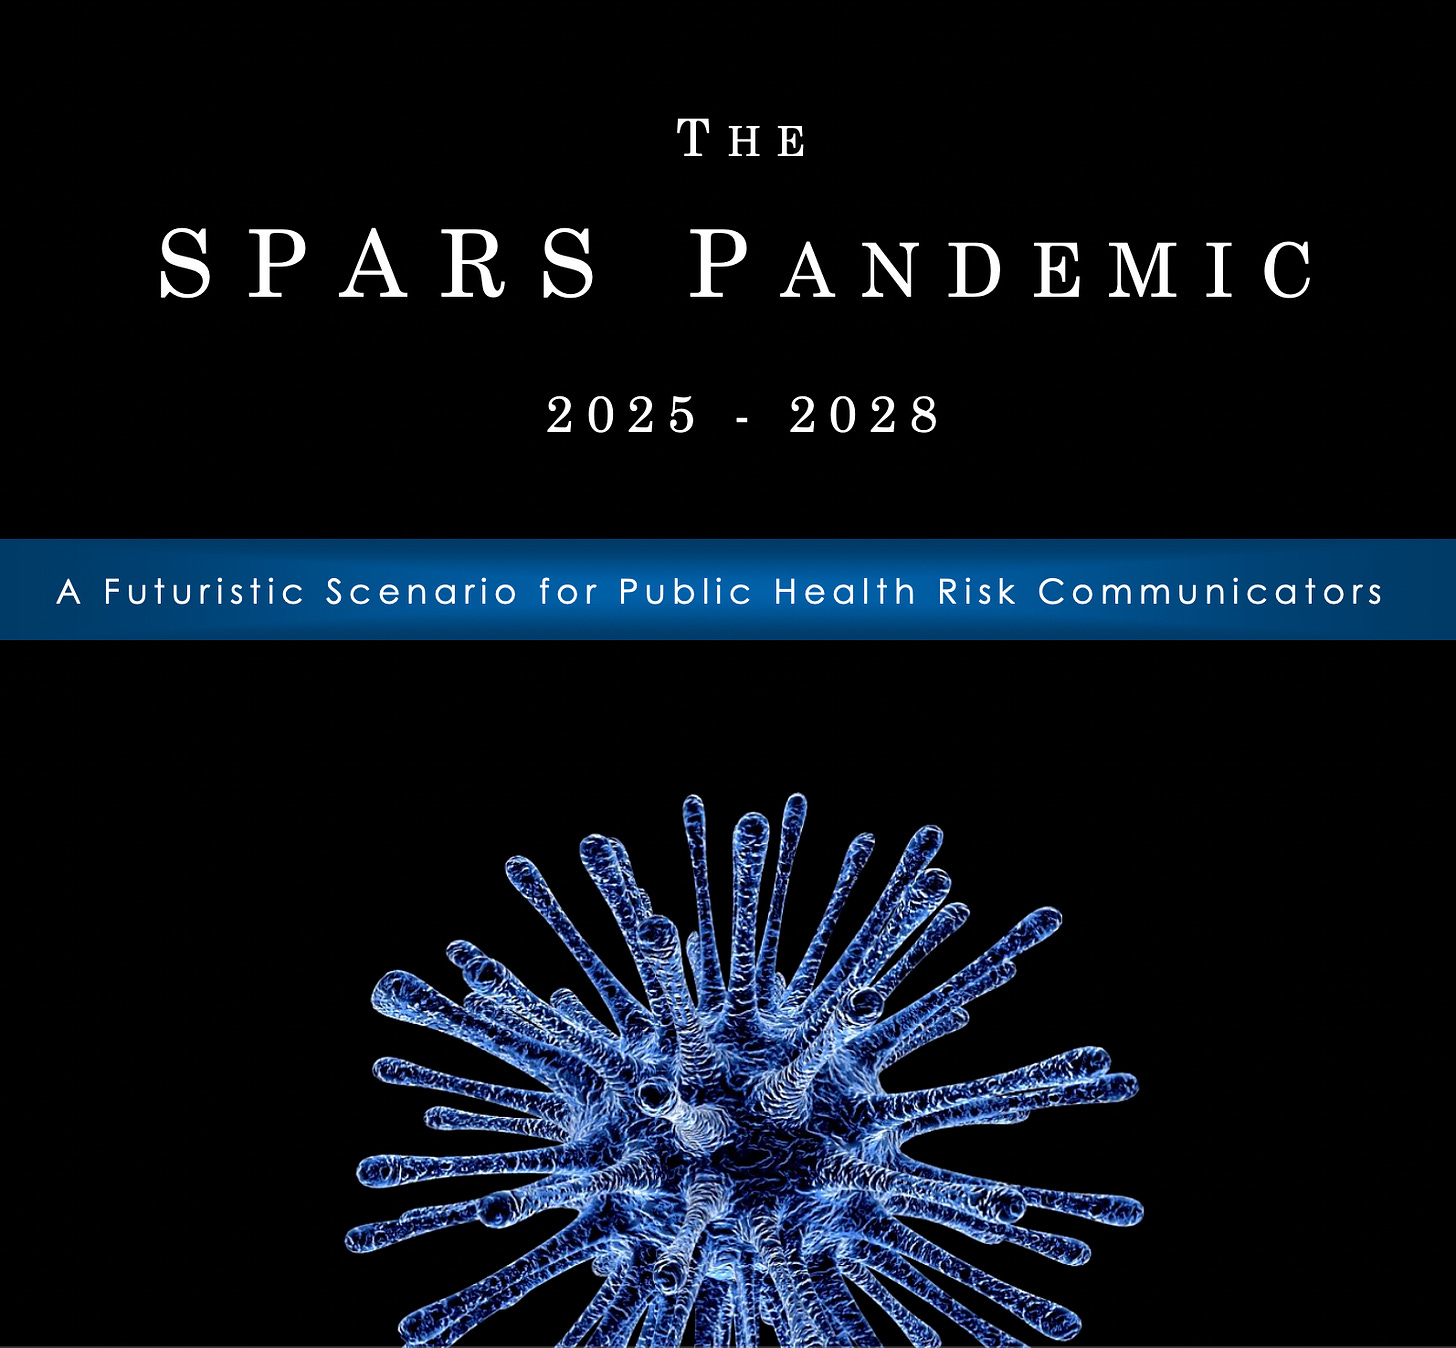 The SPARS Pandemic Planning Exercise Reveals Foreknowledge of the Dangers of Rushing Medical Countermeasures into People's Bodies